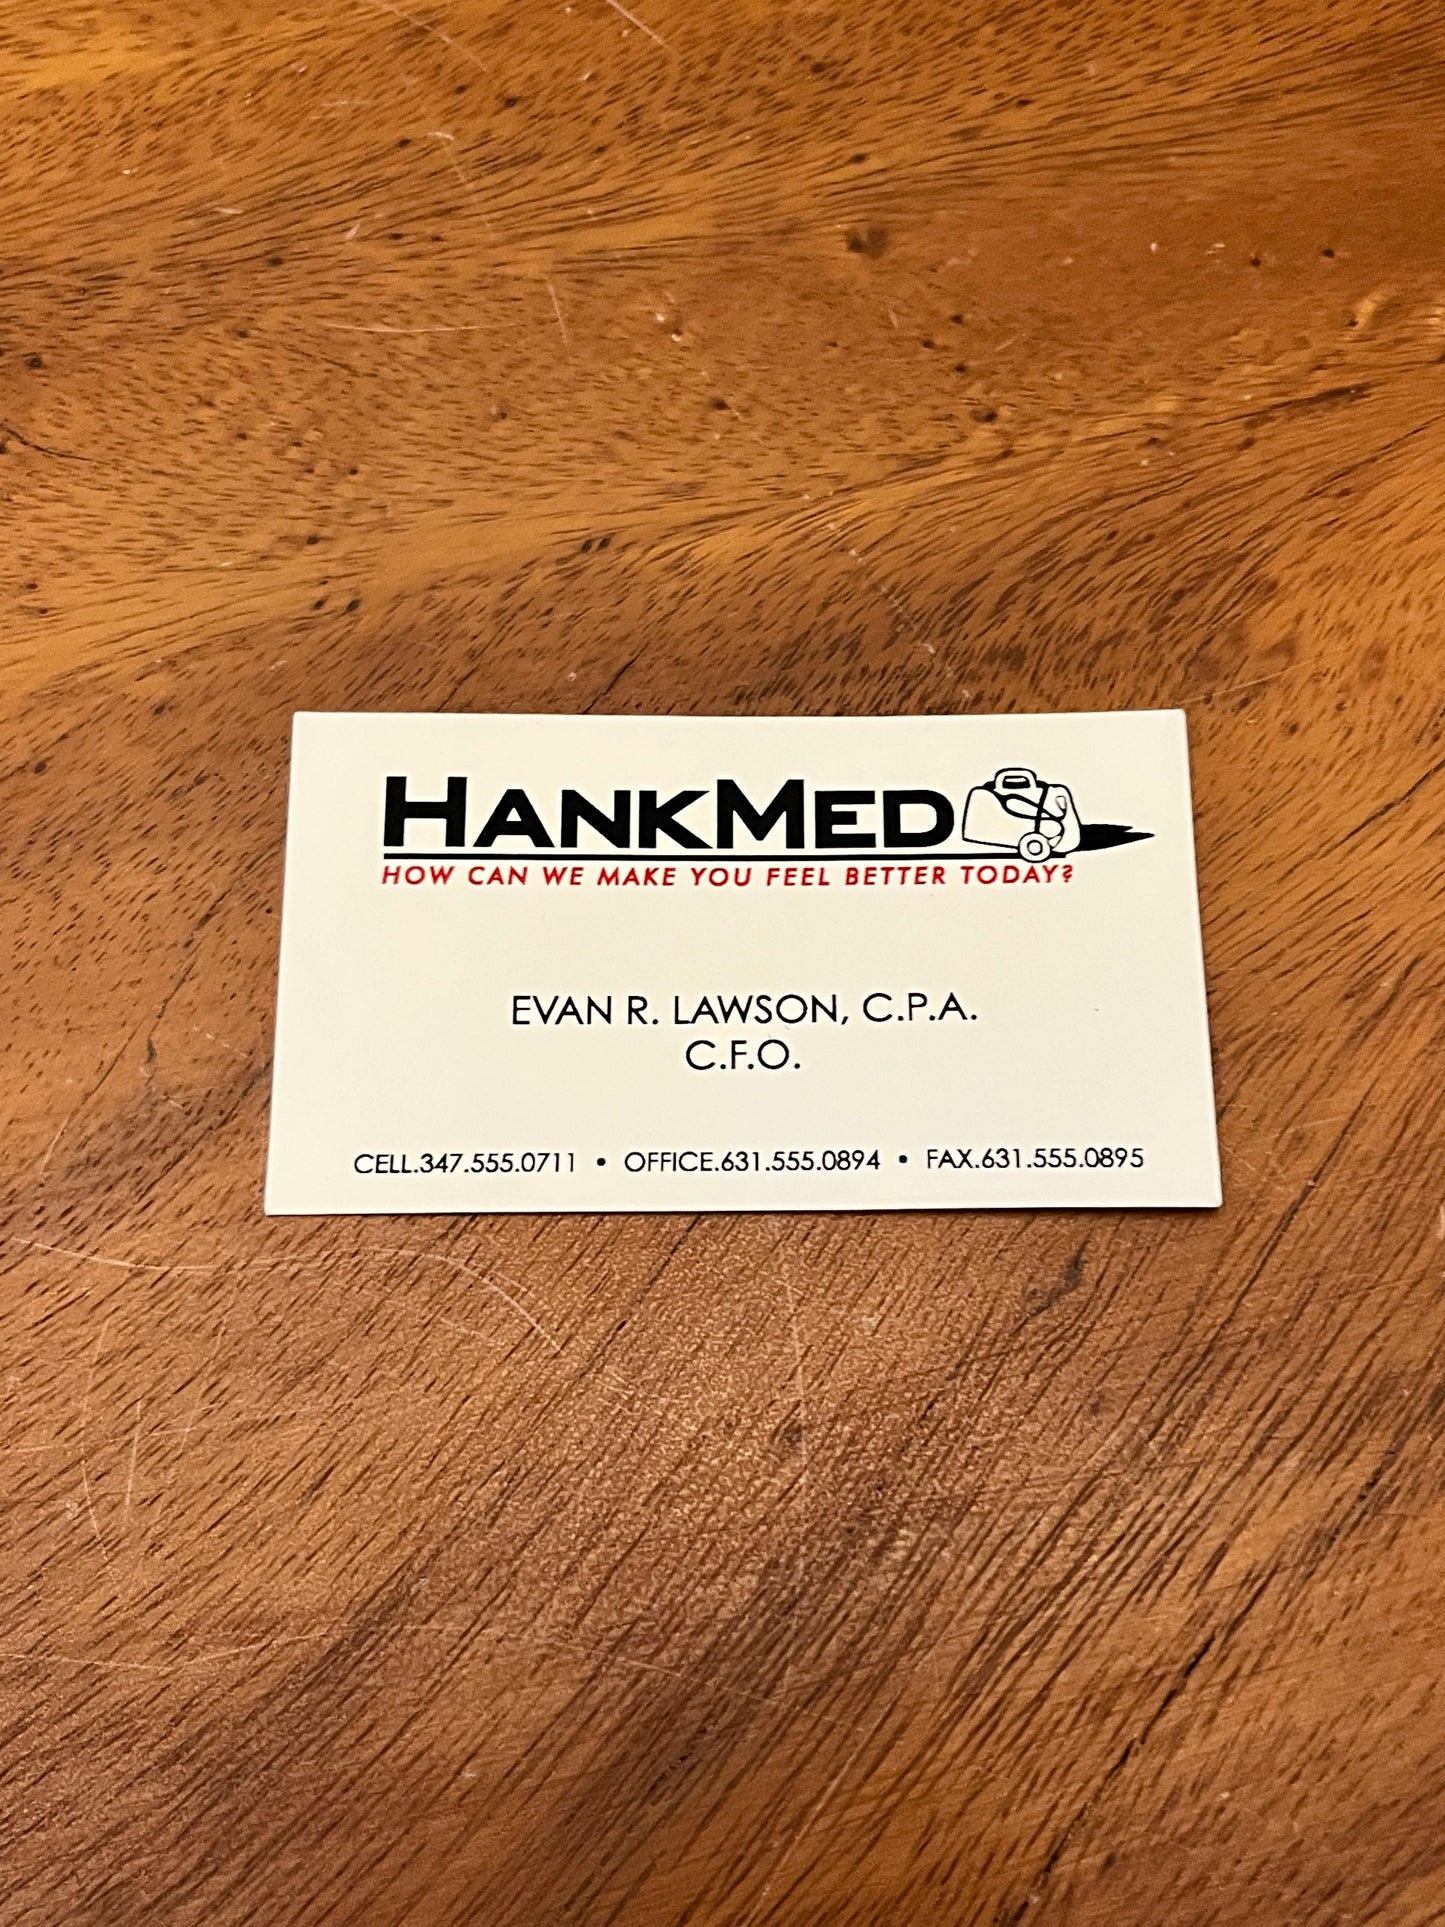 Royal Pains: Evan Lawson’s HANKMED Business Cards (2)